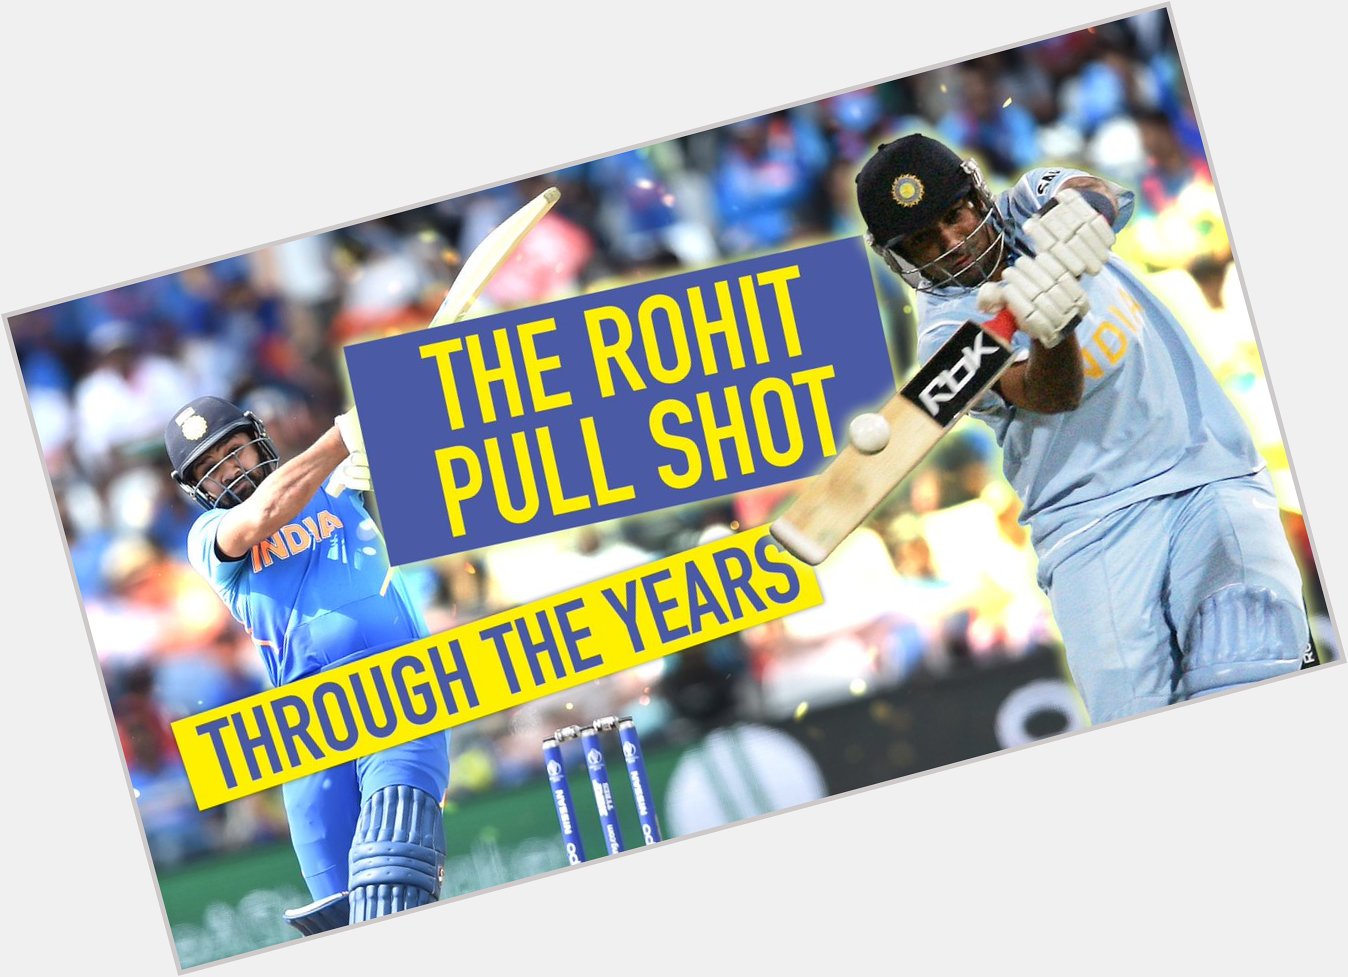 Happy Birthday to Rohit Sharma. He is the master of pull short and always play it effortlessly. 